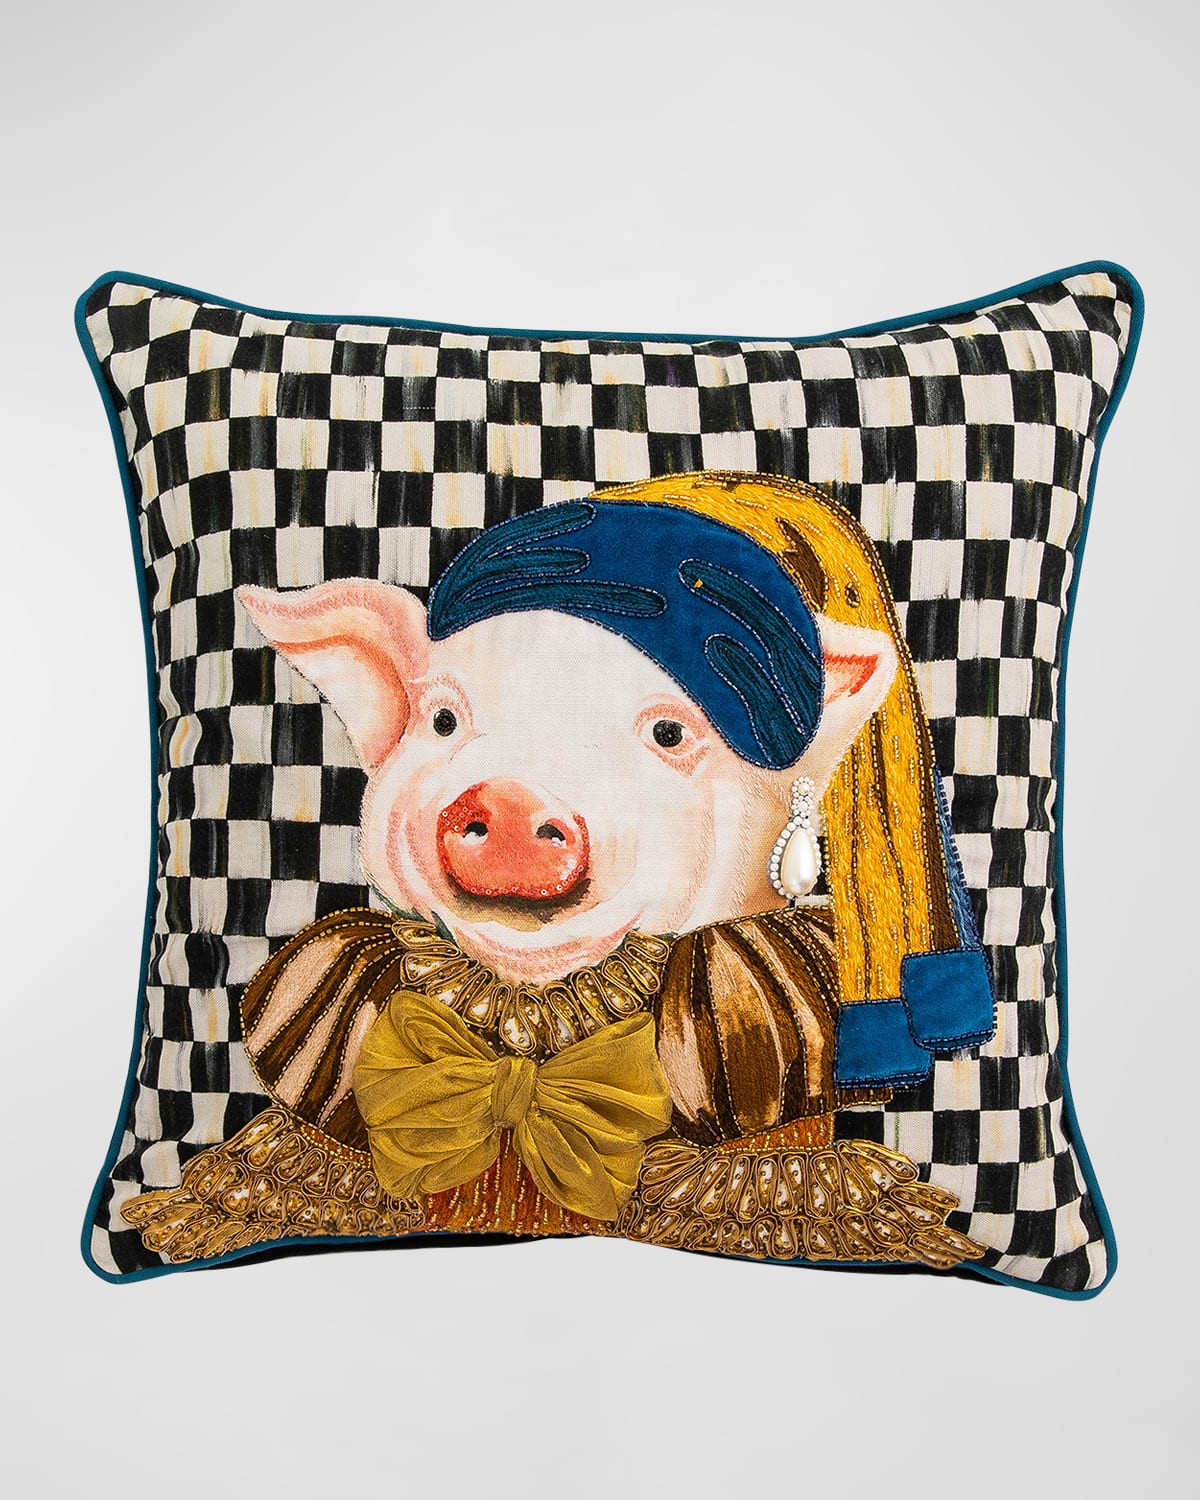 Mackenzie-childs Pig With Pearl Earring Pillow In Black